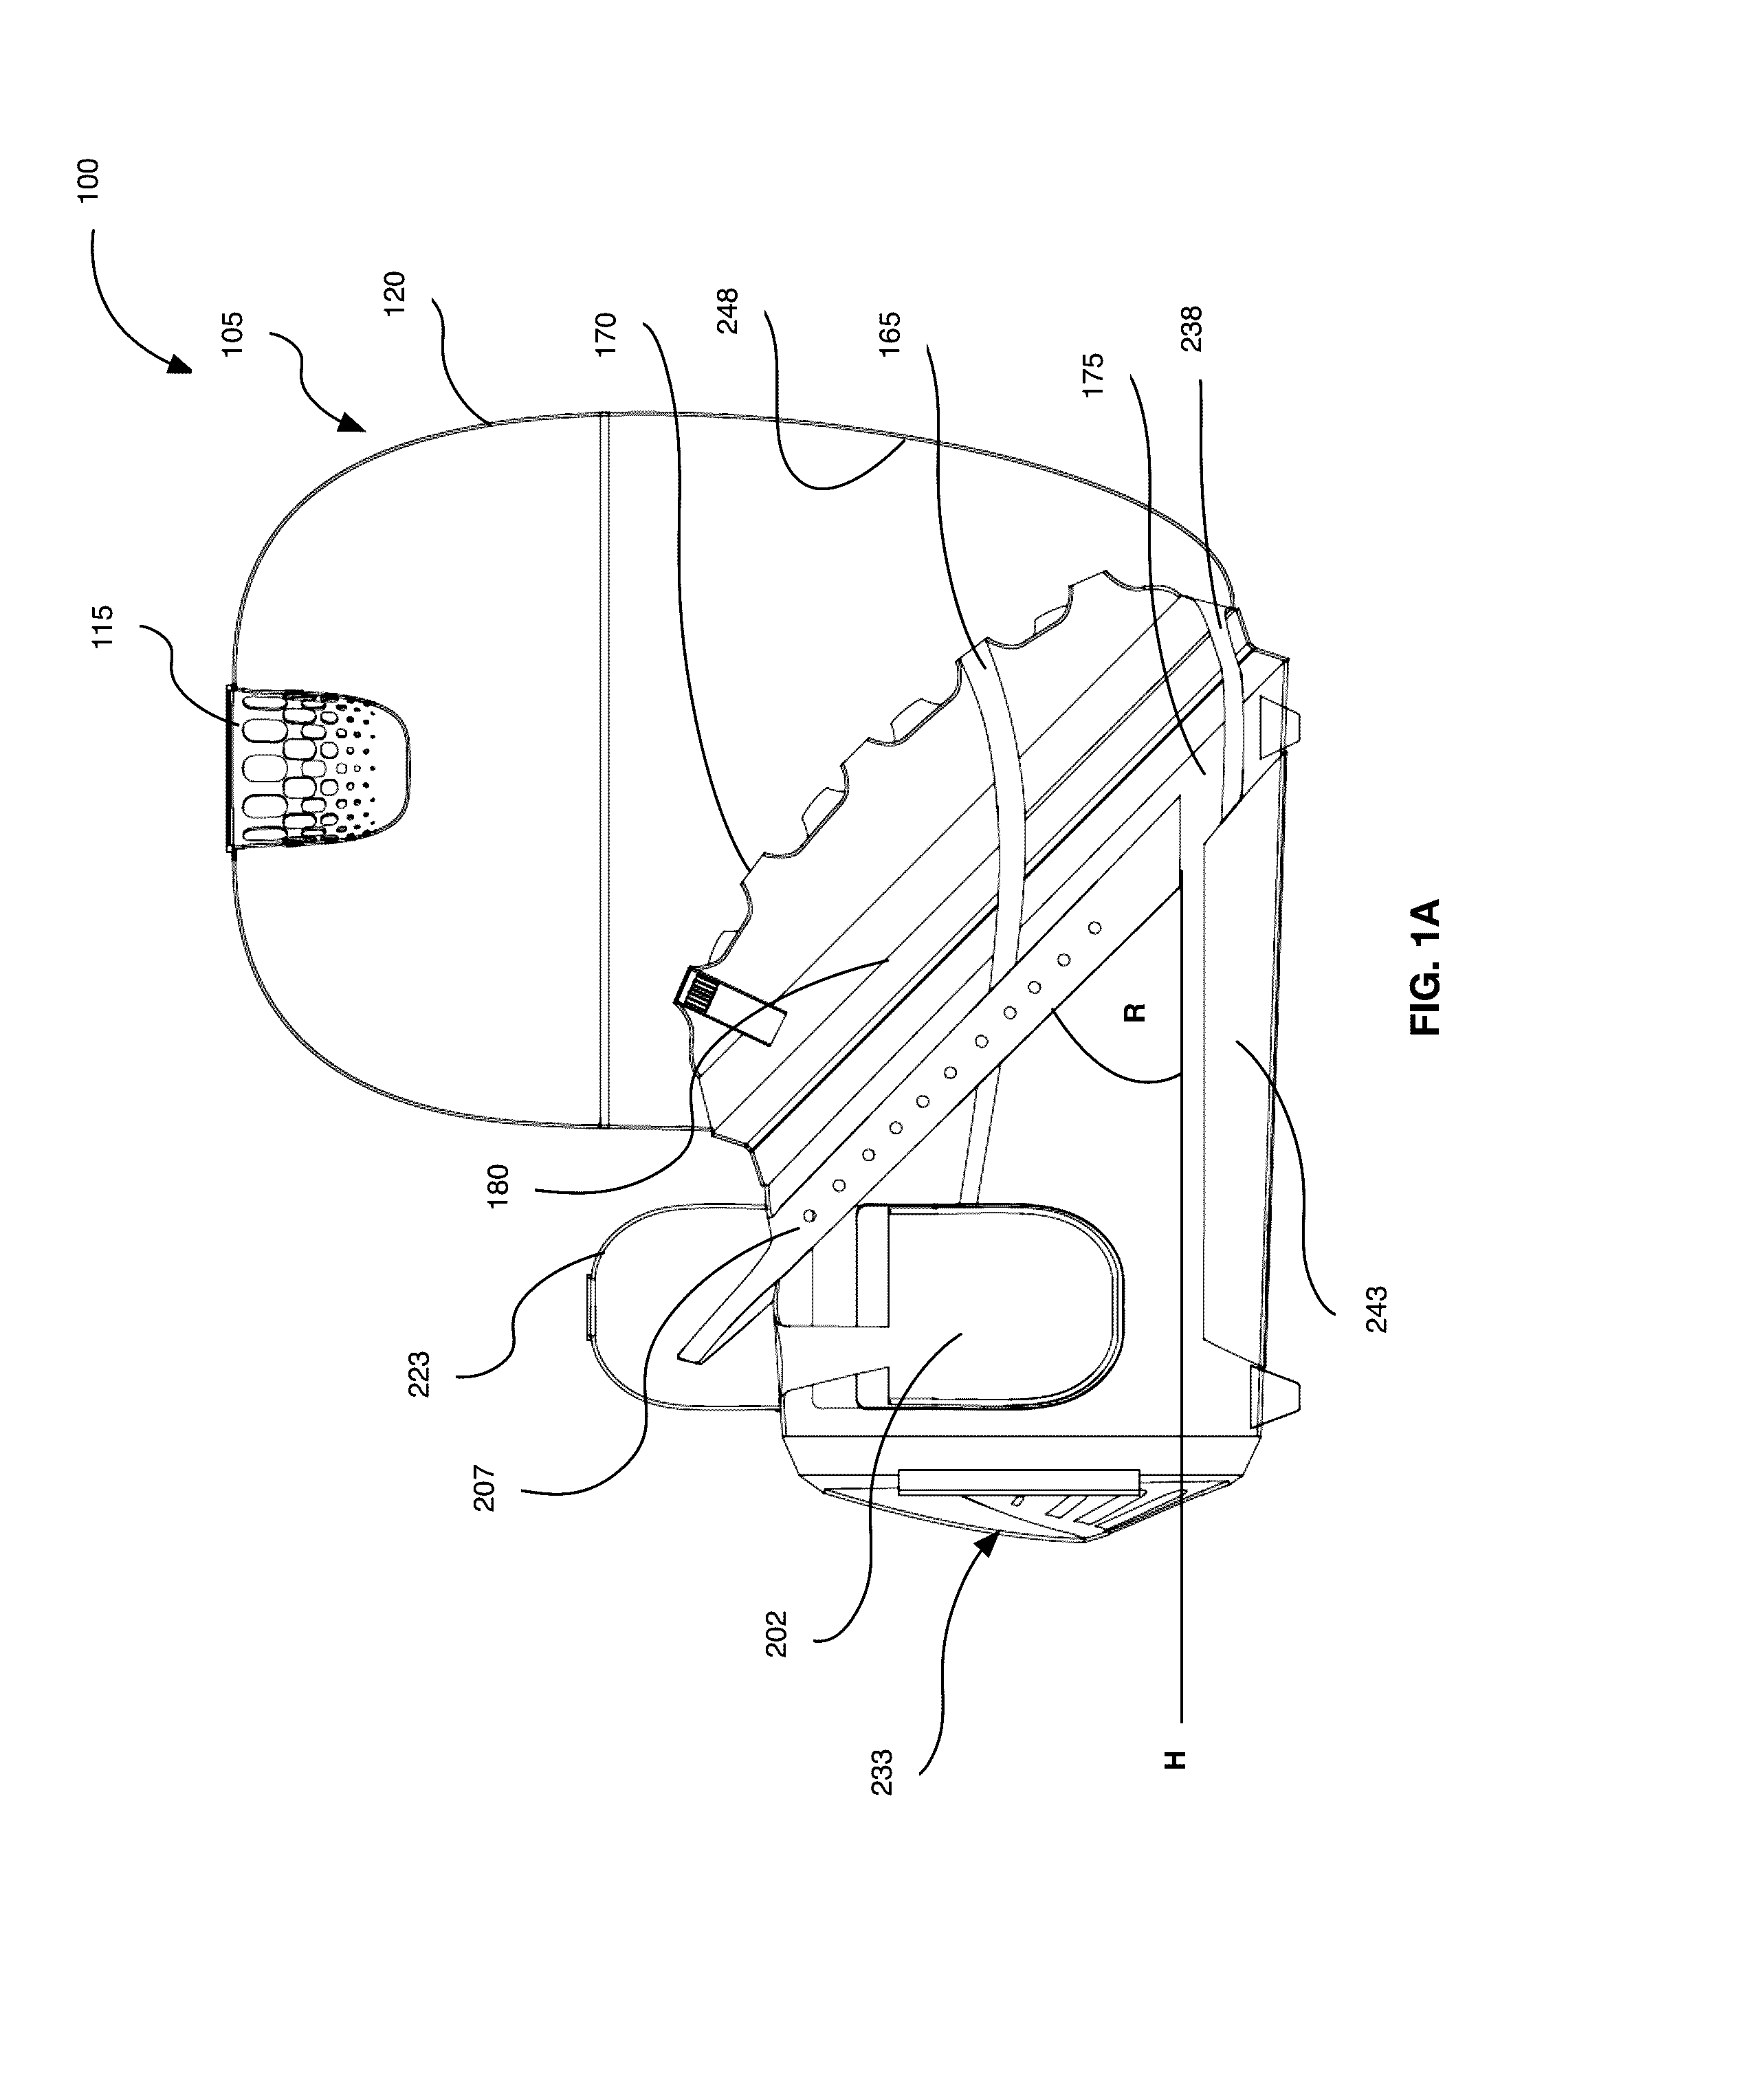 System and method for breeding and harvesting insects